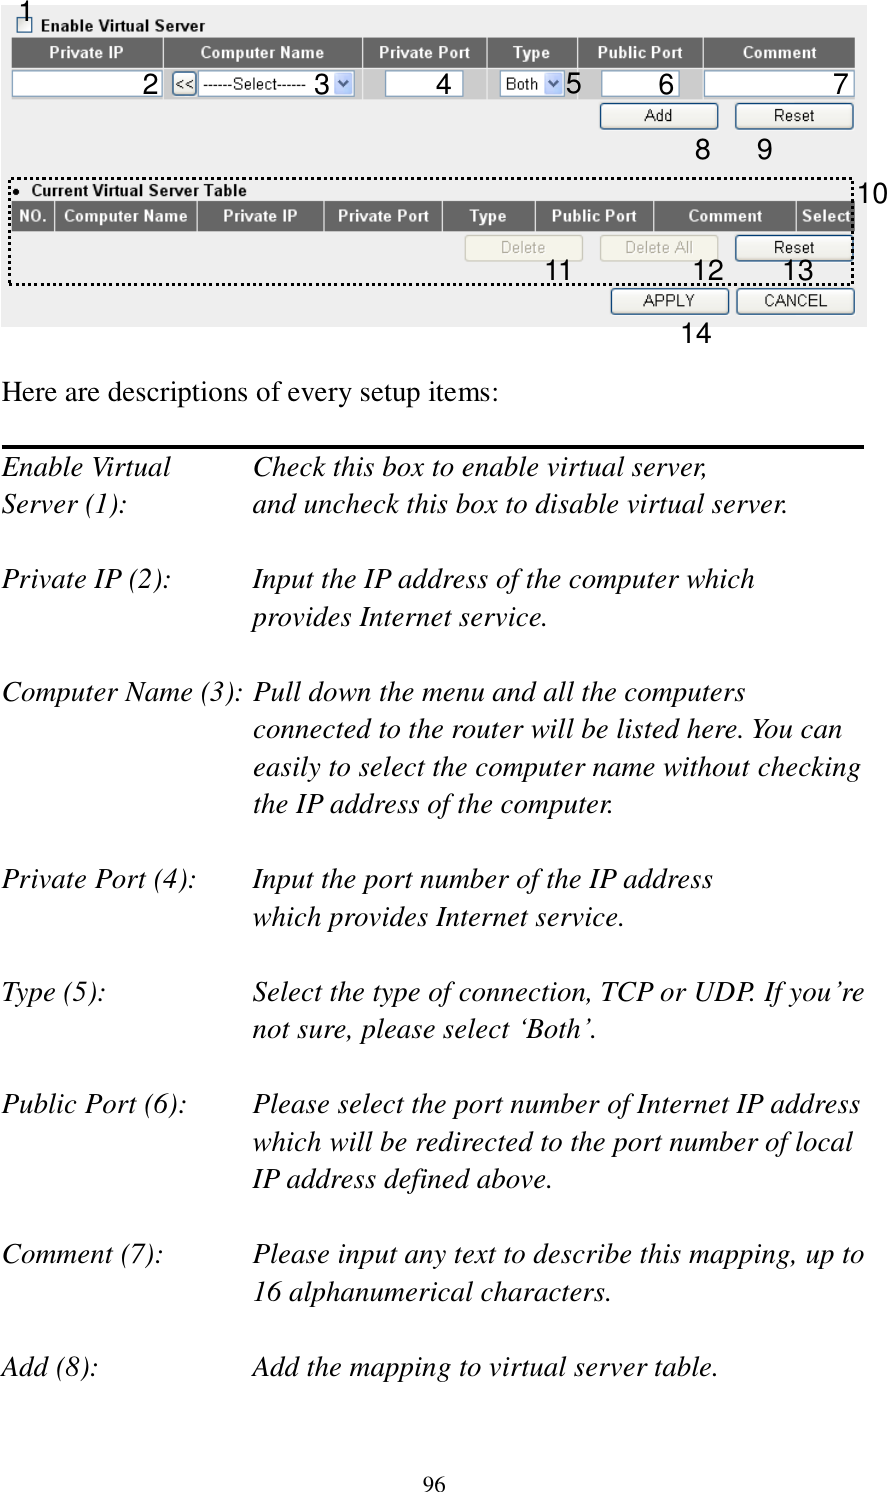 96   Here are descriptions of every setup items:  Enable Virtual      Check this box to enable virtual server, Server (1):       and uncheck this box to disable virtual server.  Private IP (2):      Input the IP address of the computer which           provides Internet service.  Computer Name (3): Pull down the menu and all the computers connected to the router will be listed here. You can easily to select the computer name without checking the IP address of the computer.  Private Port (4):    Input the port number of the IP address           which provides Internet service.  Type (5):    Select the type of connection, TCP or UDP. If you‟re not sure, please select „Both‟.  Public Port (6):    Please select the port number of Internet IP address which will be redirected to the port number of local IP address defined above.  Comment (7):    Please input any text to describe this mapping, up to 16 alphanumerical characters.  Add (8):        Add the mapping to virtual server table.  1 2 3 4 5 8 9 10 11 12 13 14 7 6 